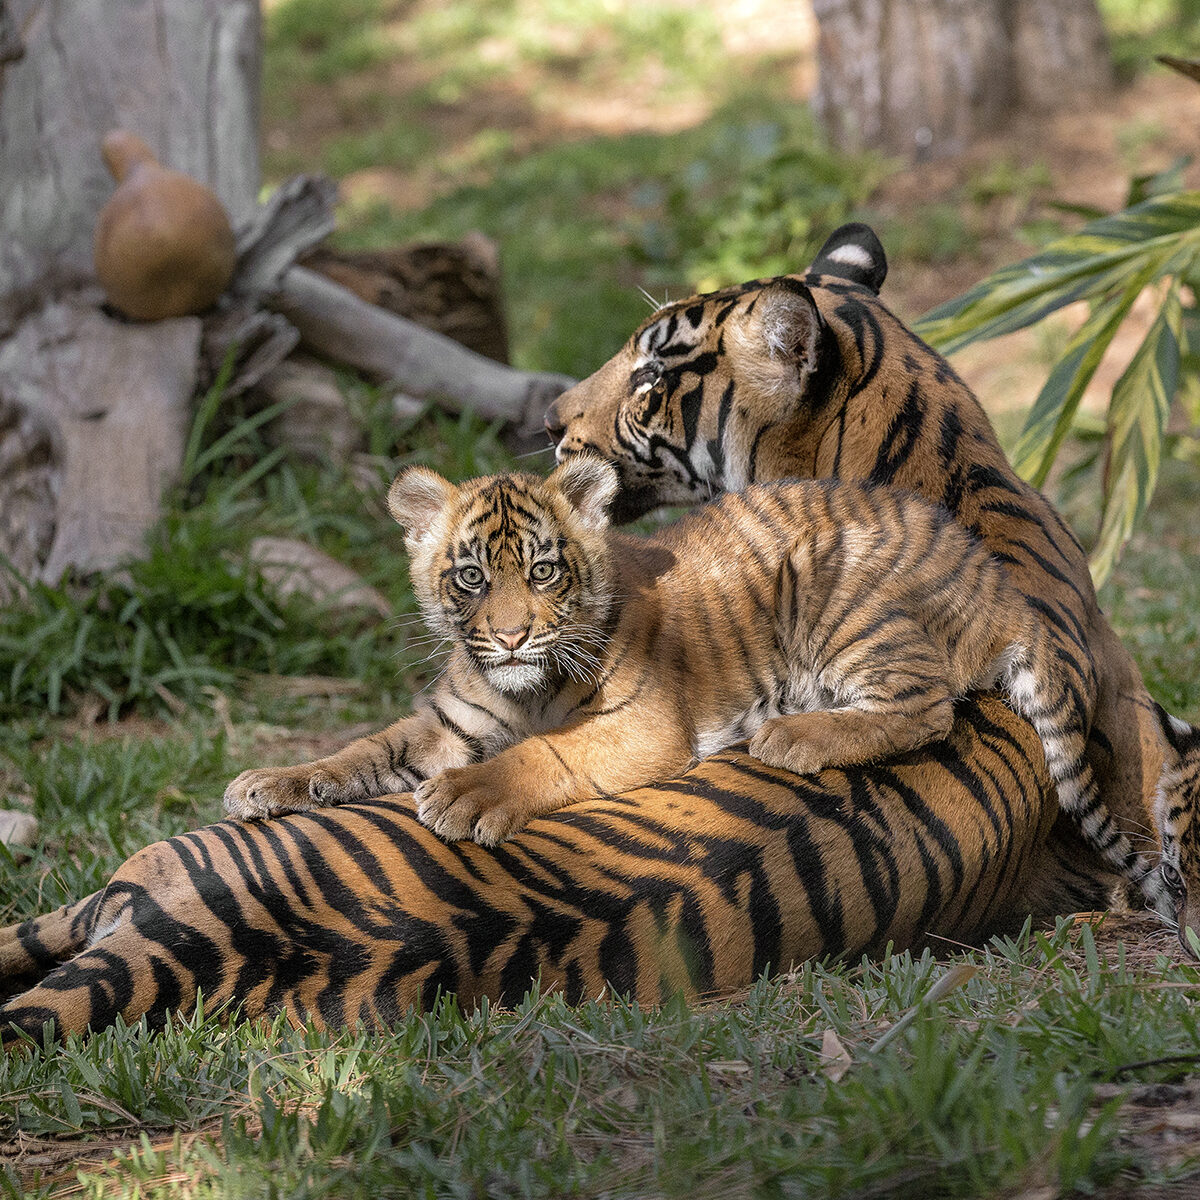 Adorable tiger cubs now ready for your visit at the San Diego Zoo